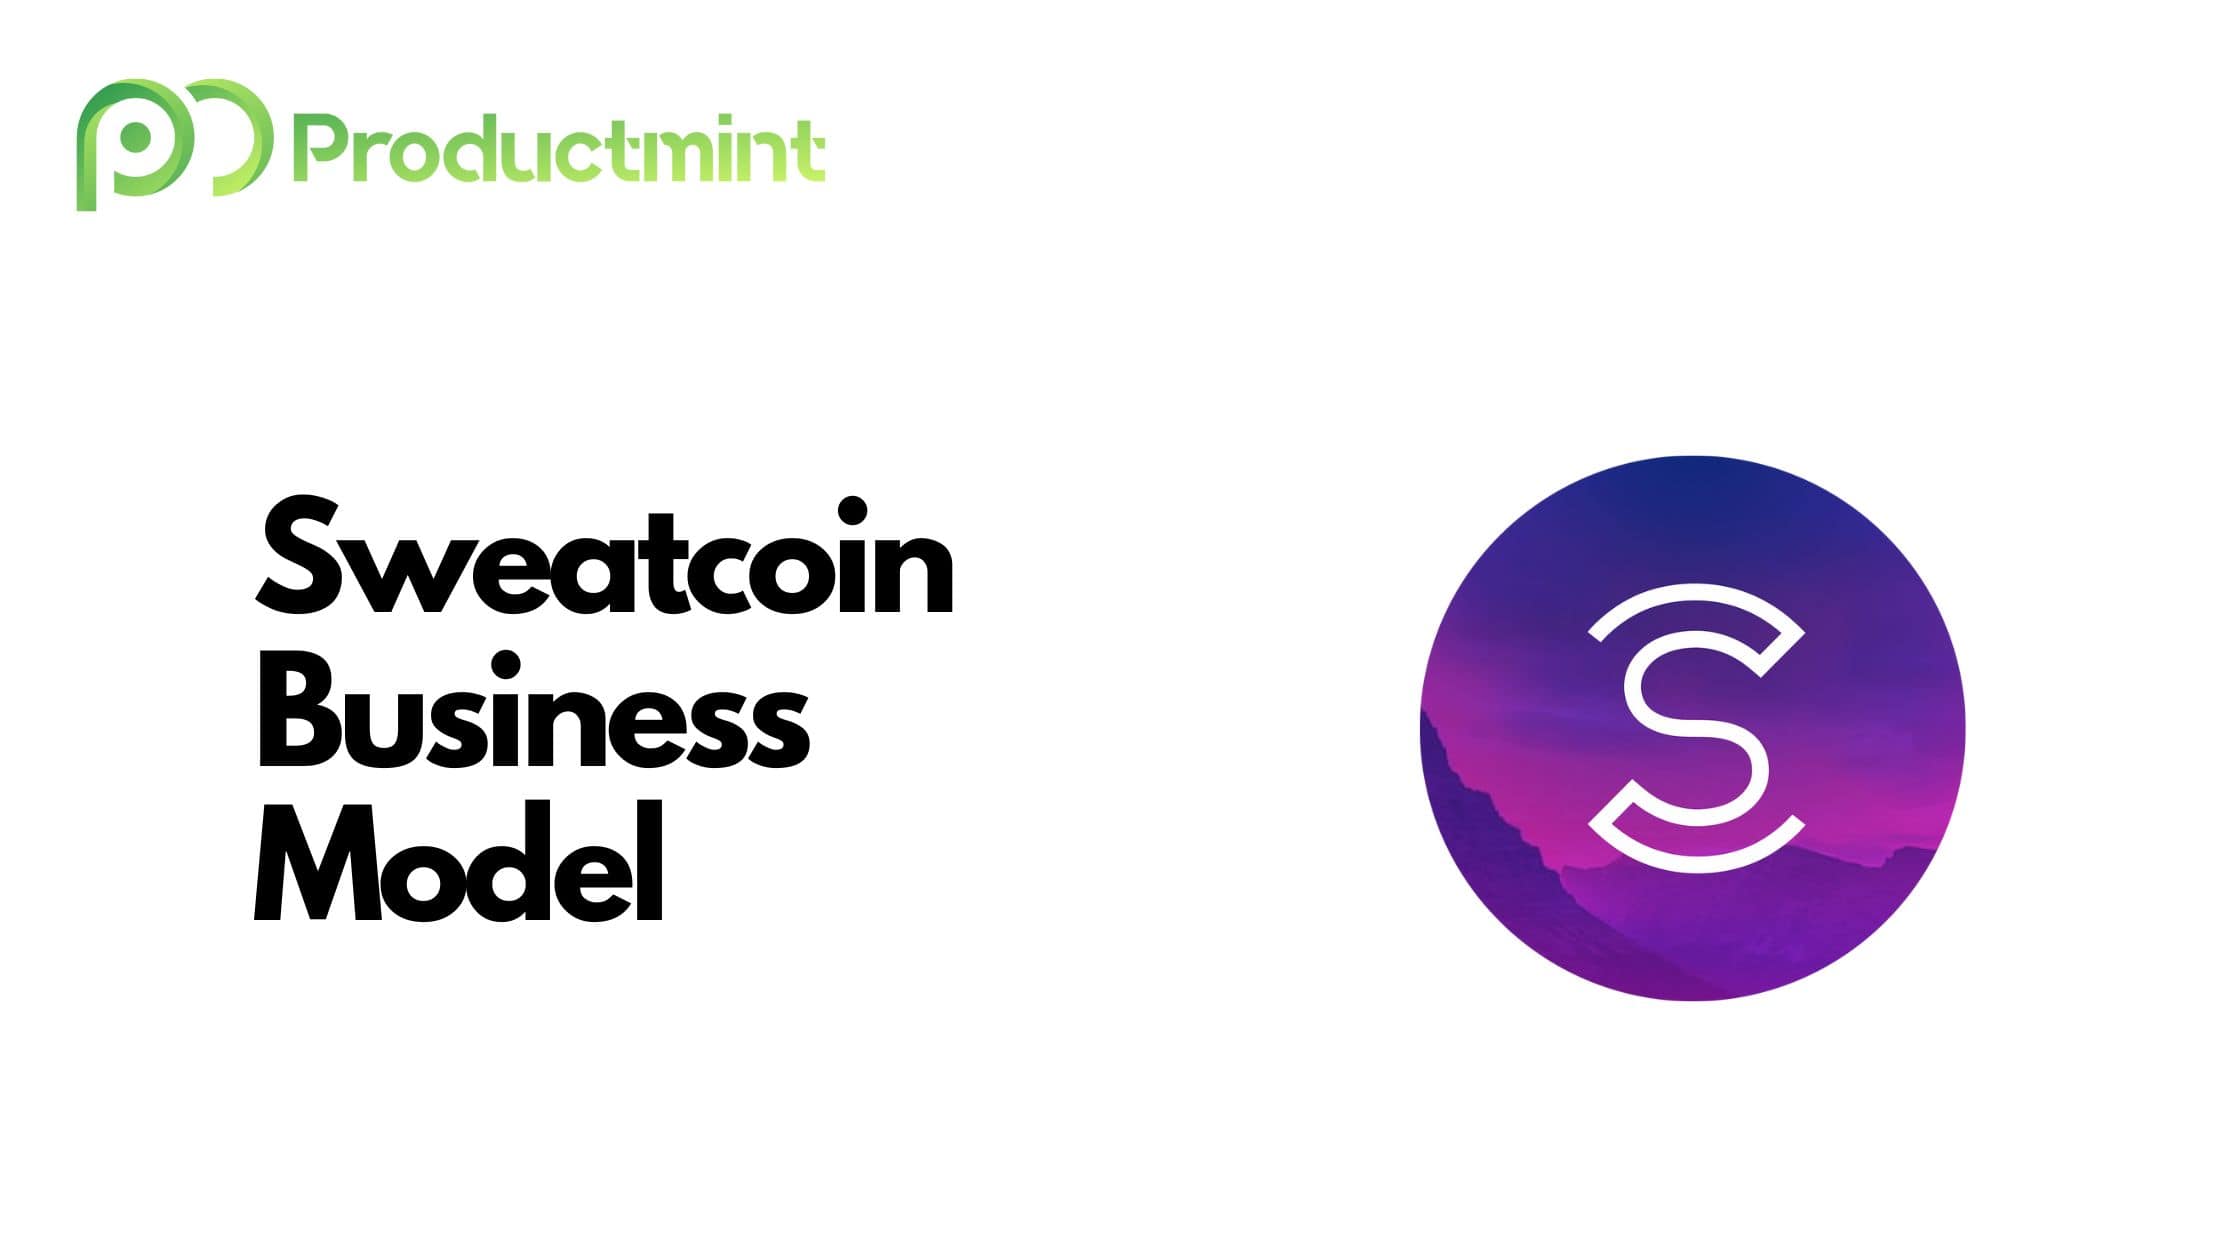 How Does Sweatcoin Make Money